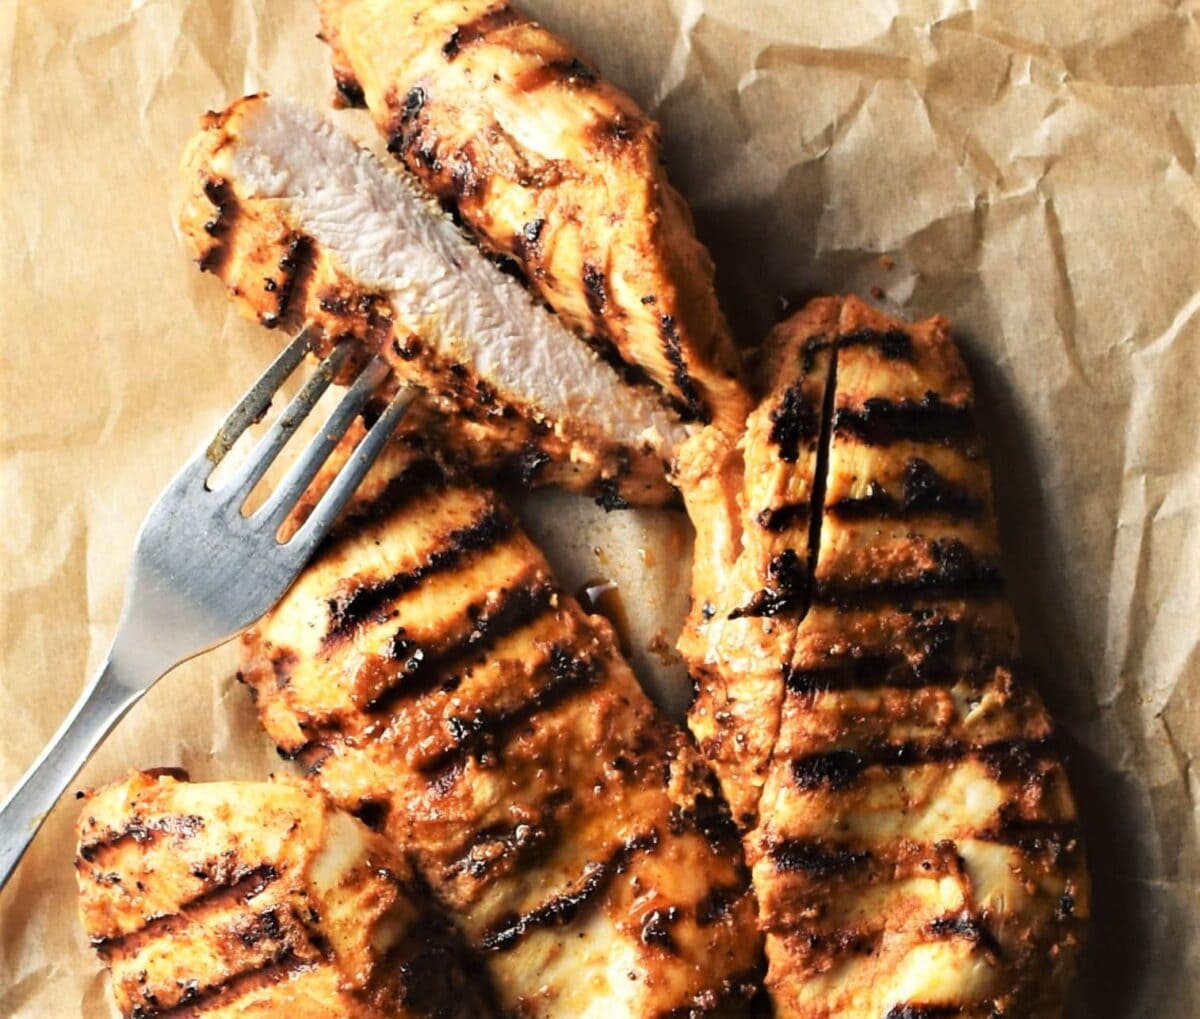 Grilled chicken breast pieces with fork on top of parchment.